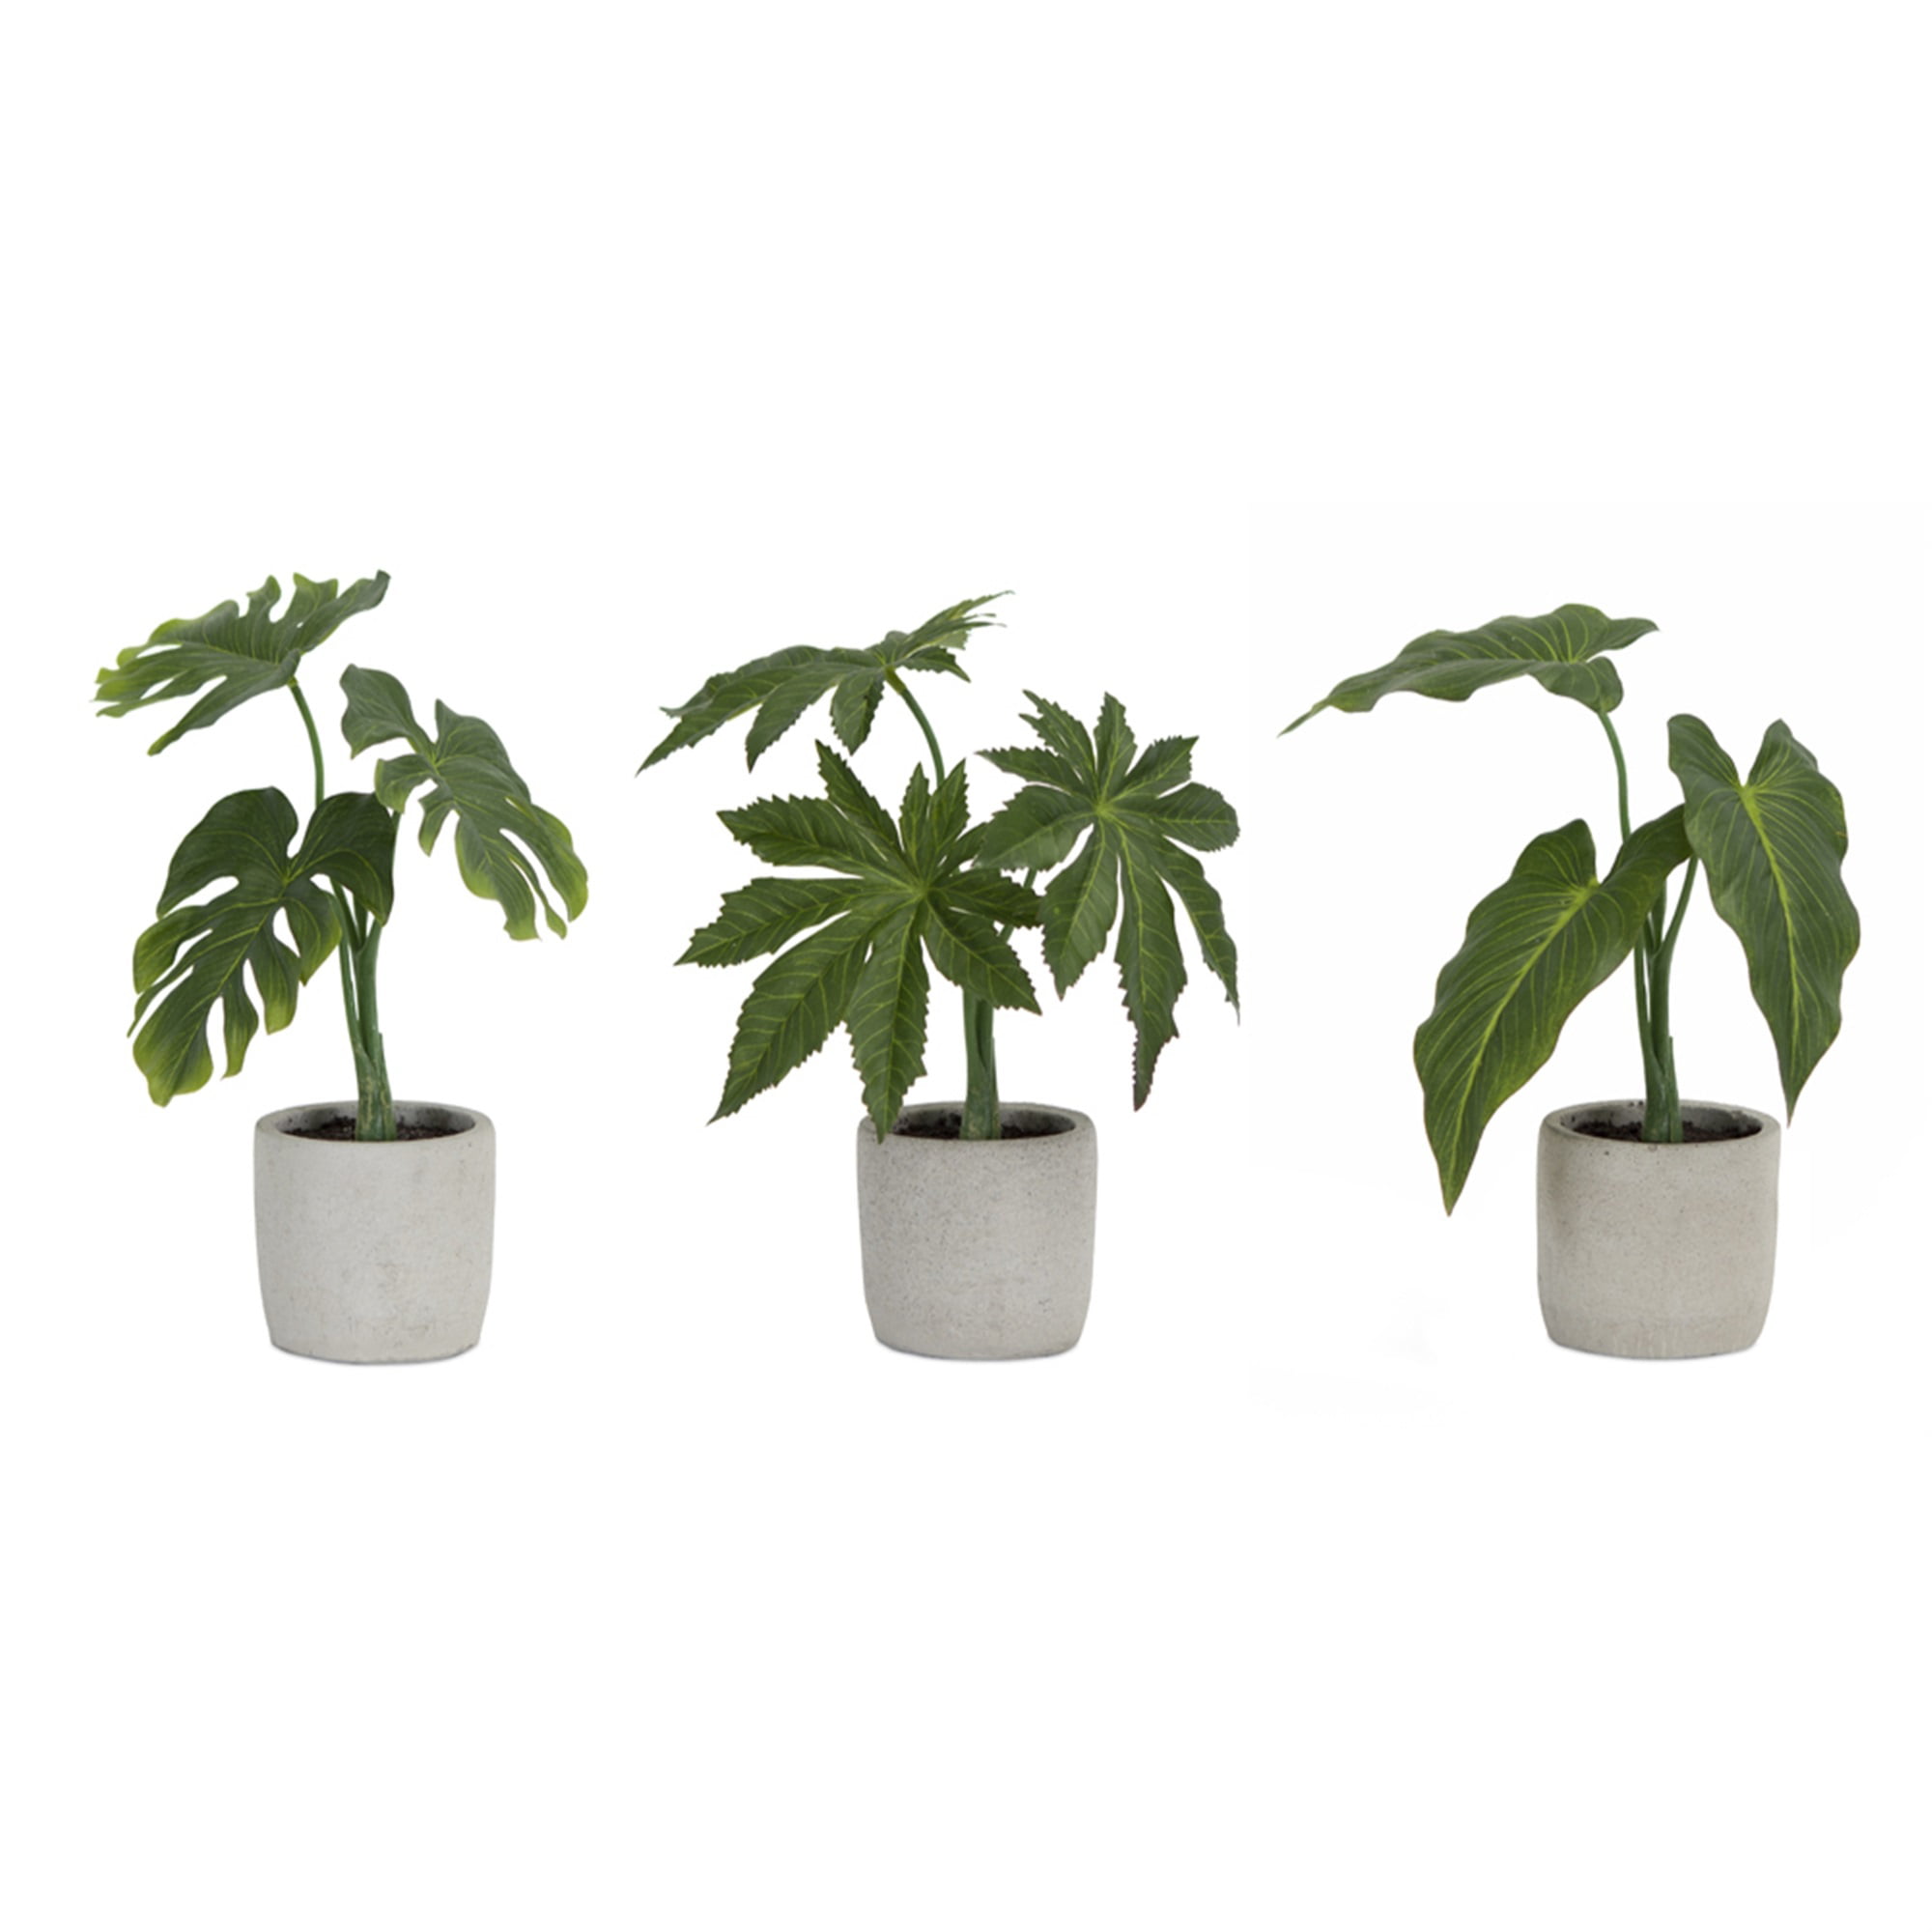 Potted Foliage (Set of 6) 10"H, 10.5"H, 11.5"H Polyester/Plastic